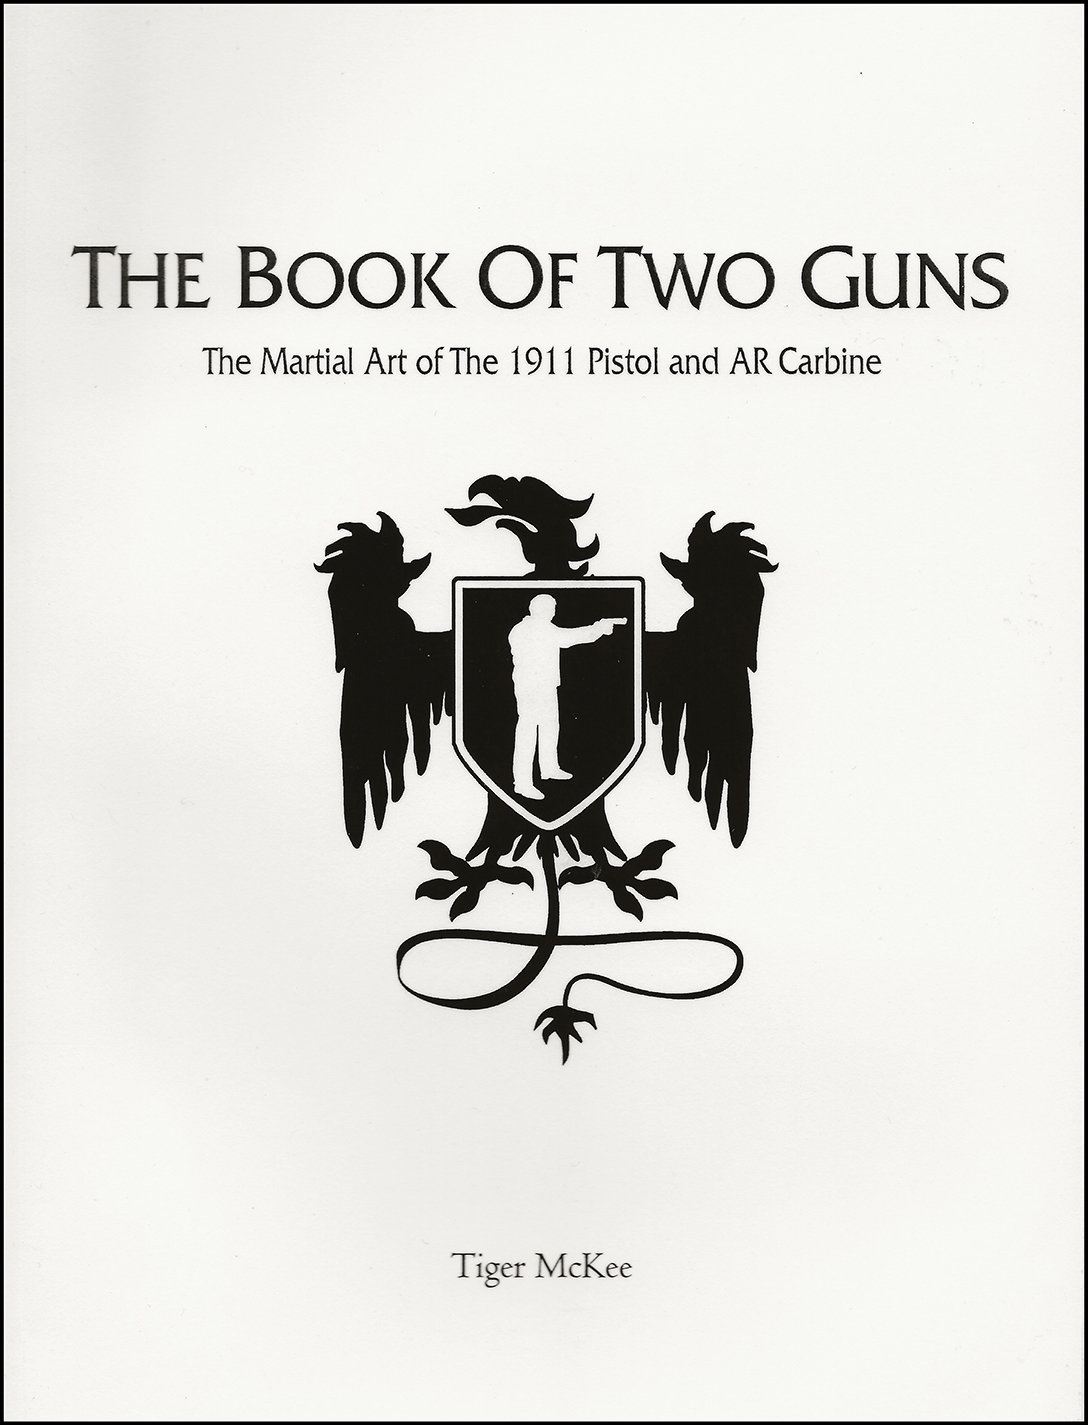 The Book of Two Guns by Tiger McKee (Autographed)